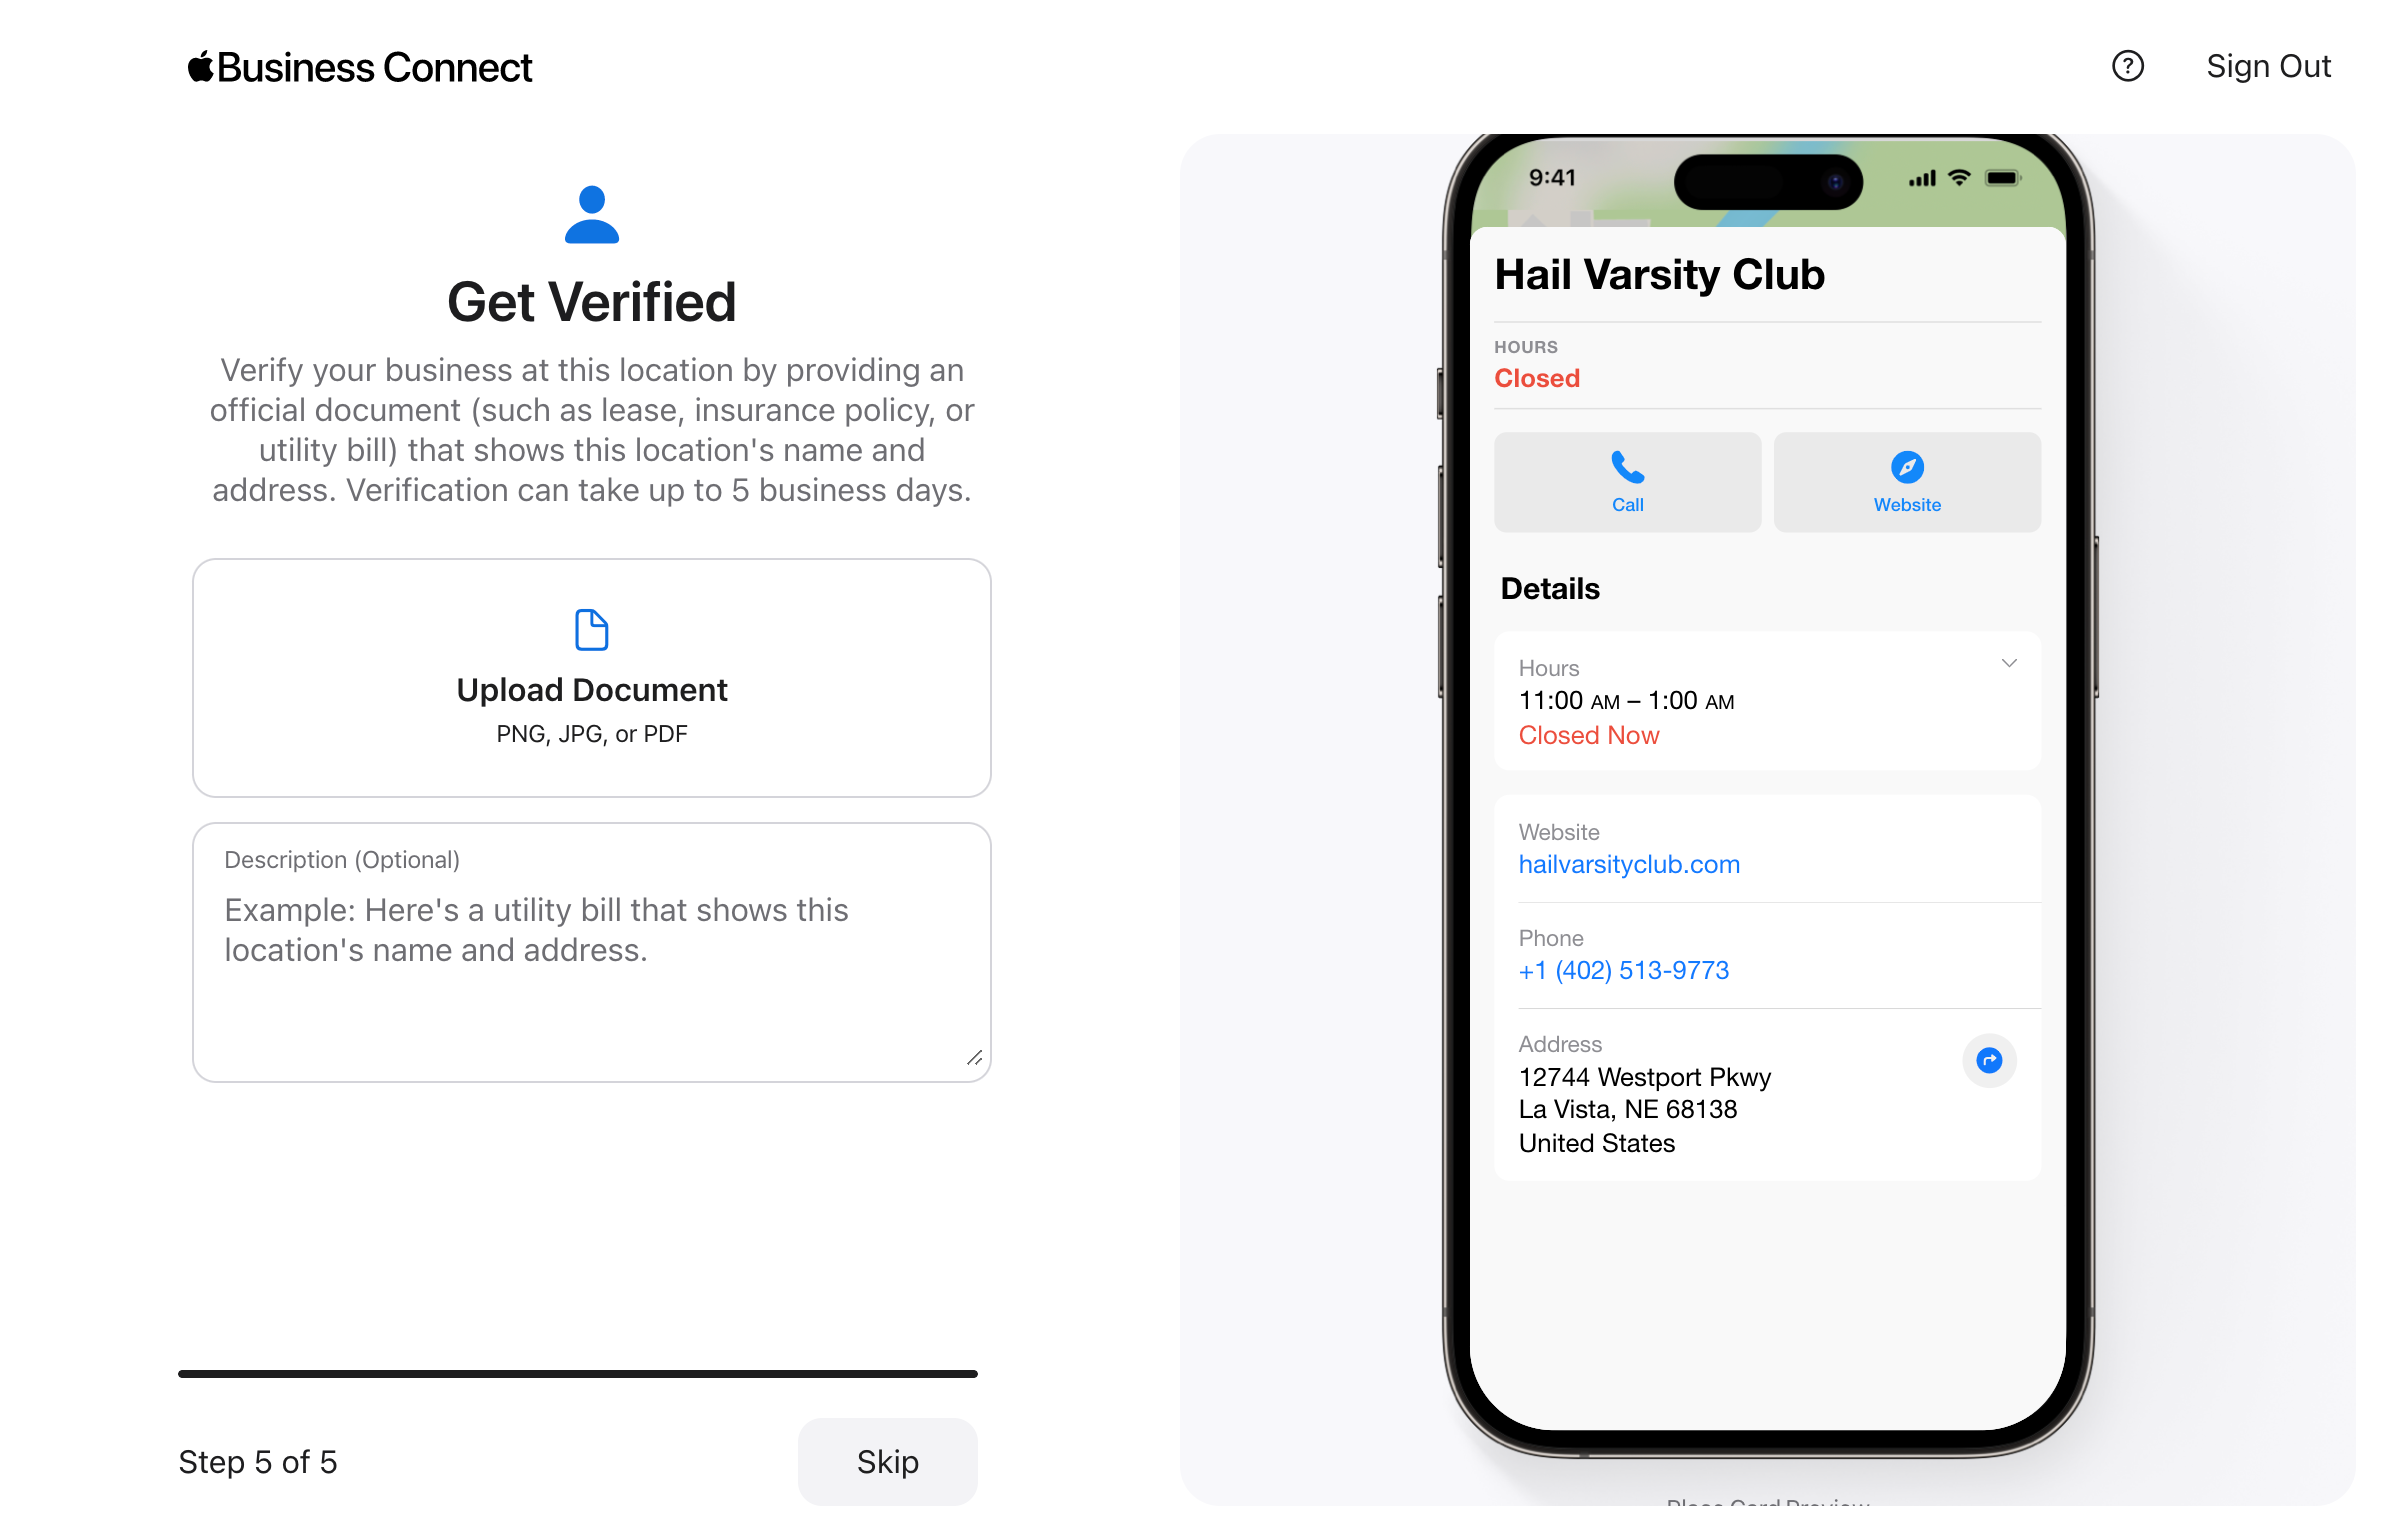 Screenshot of Apple Business Connect step 5 for getting verified with prompts to upload documents for Hail Varsity Club